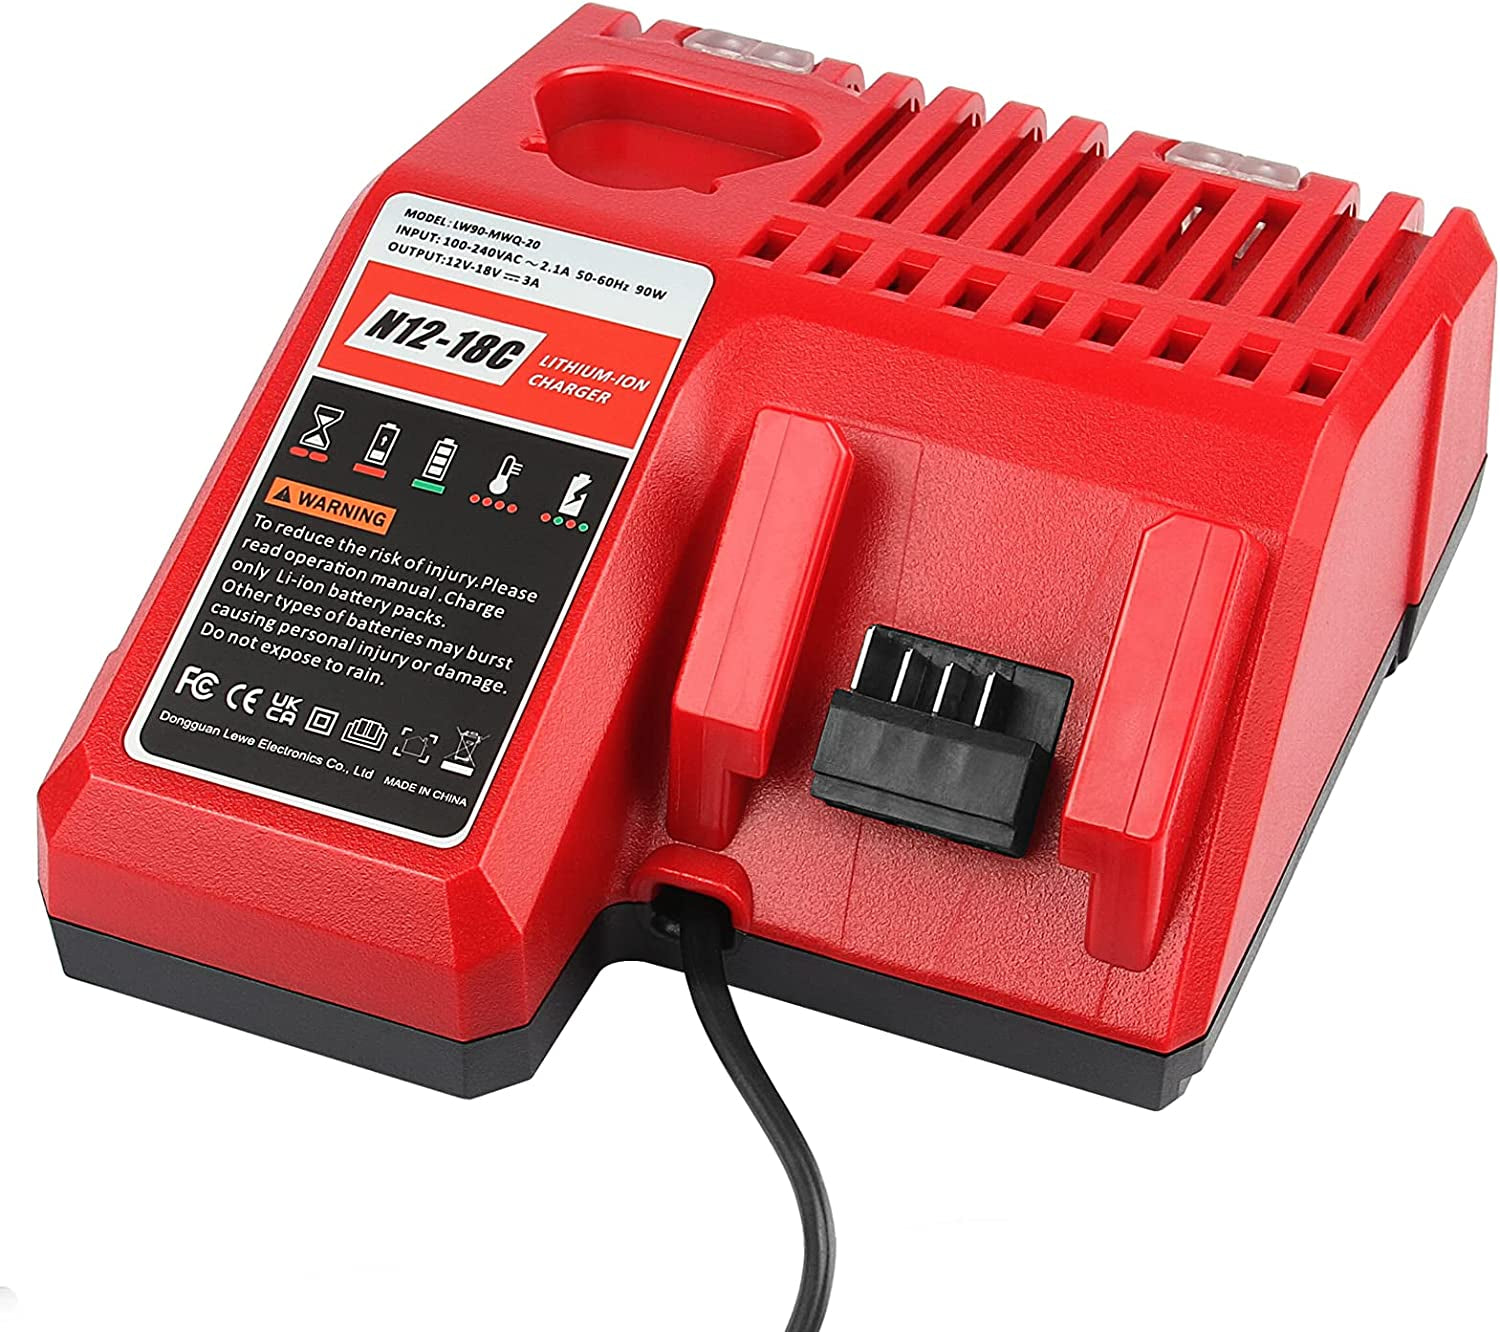 TREE.NB, Lithium Battery Charger, Multi Voltage Charger for Milwaukee 12V~18V M12 M18 48-59-1812 48-11-1850 48-11-1840 48-11-1815 Battery Power Tools Fast Charger